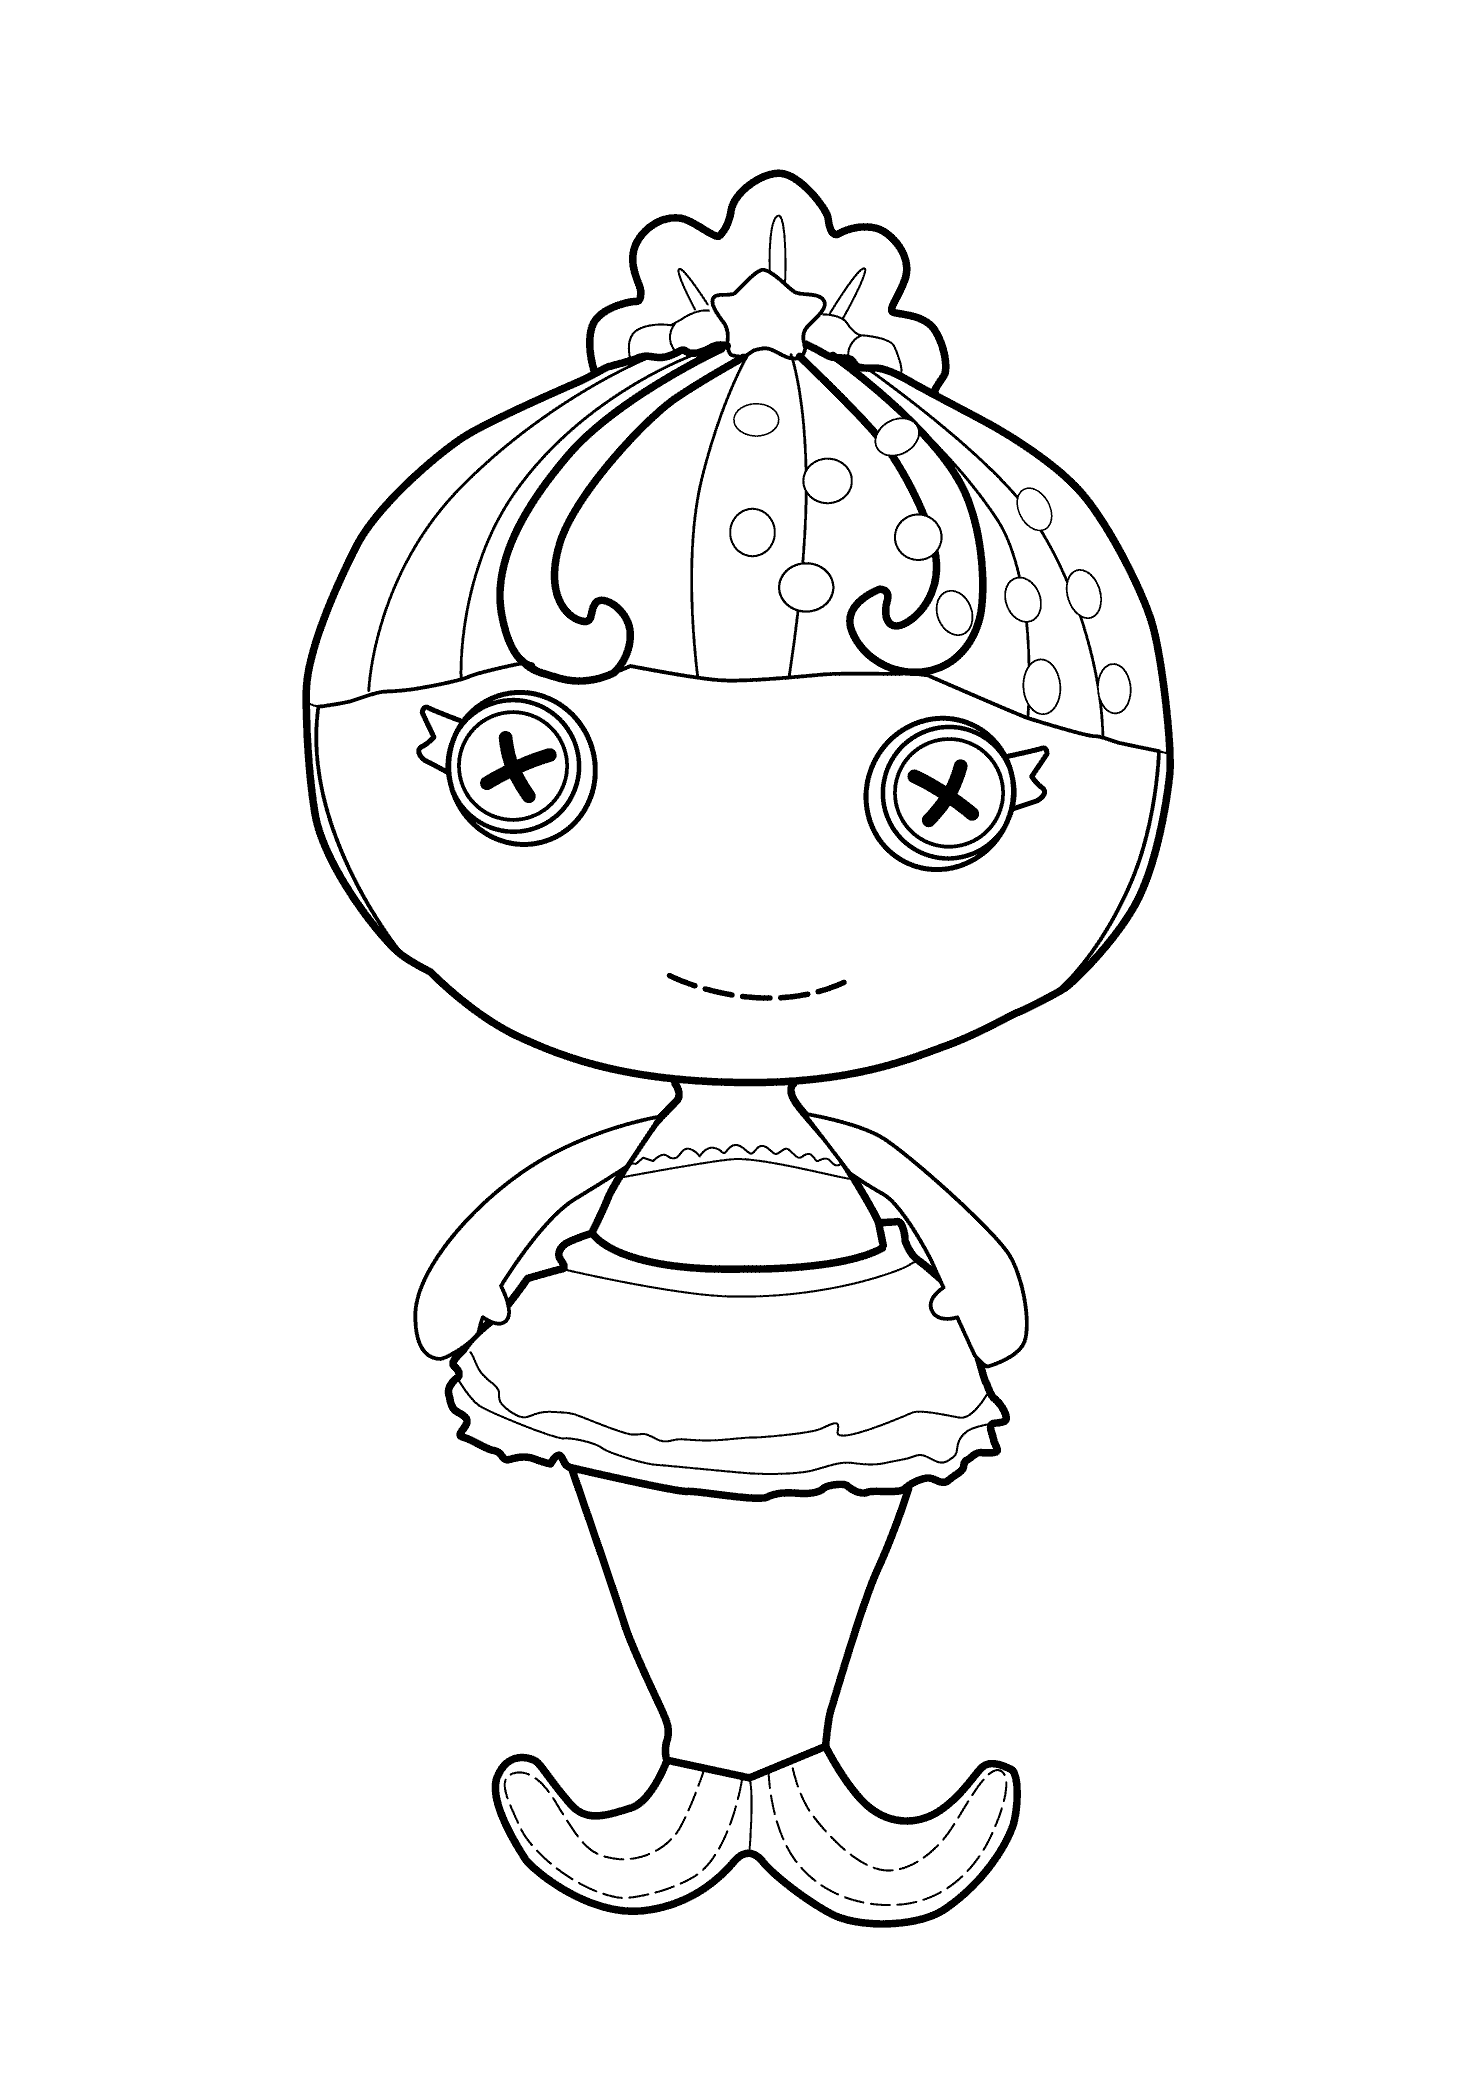 Doll Coloring Pages for Girls Button Eye Doll Printable 2021 0343 Coloring4free